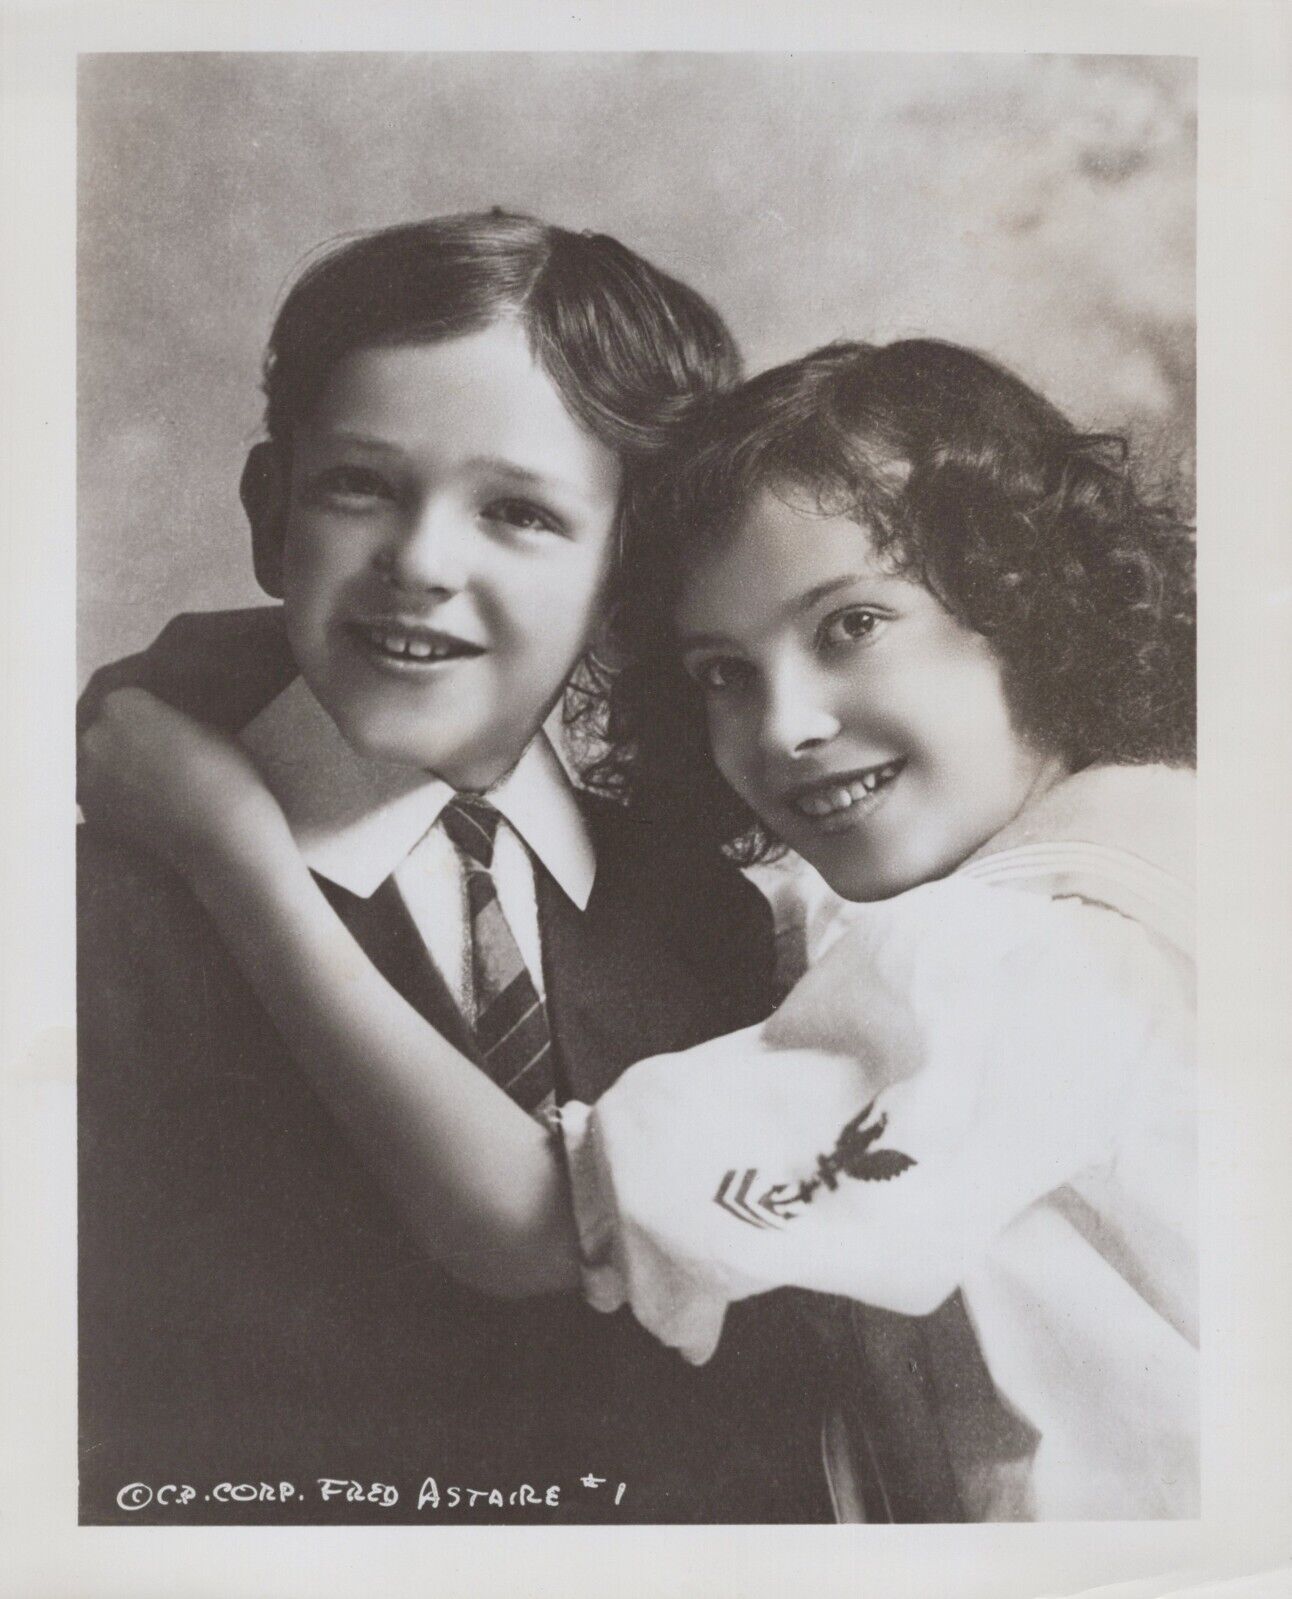 Fred Astaire and his sister Adele Astaire (1950s) ❤ Vintage Photo K 520